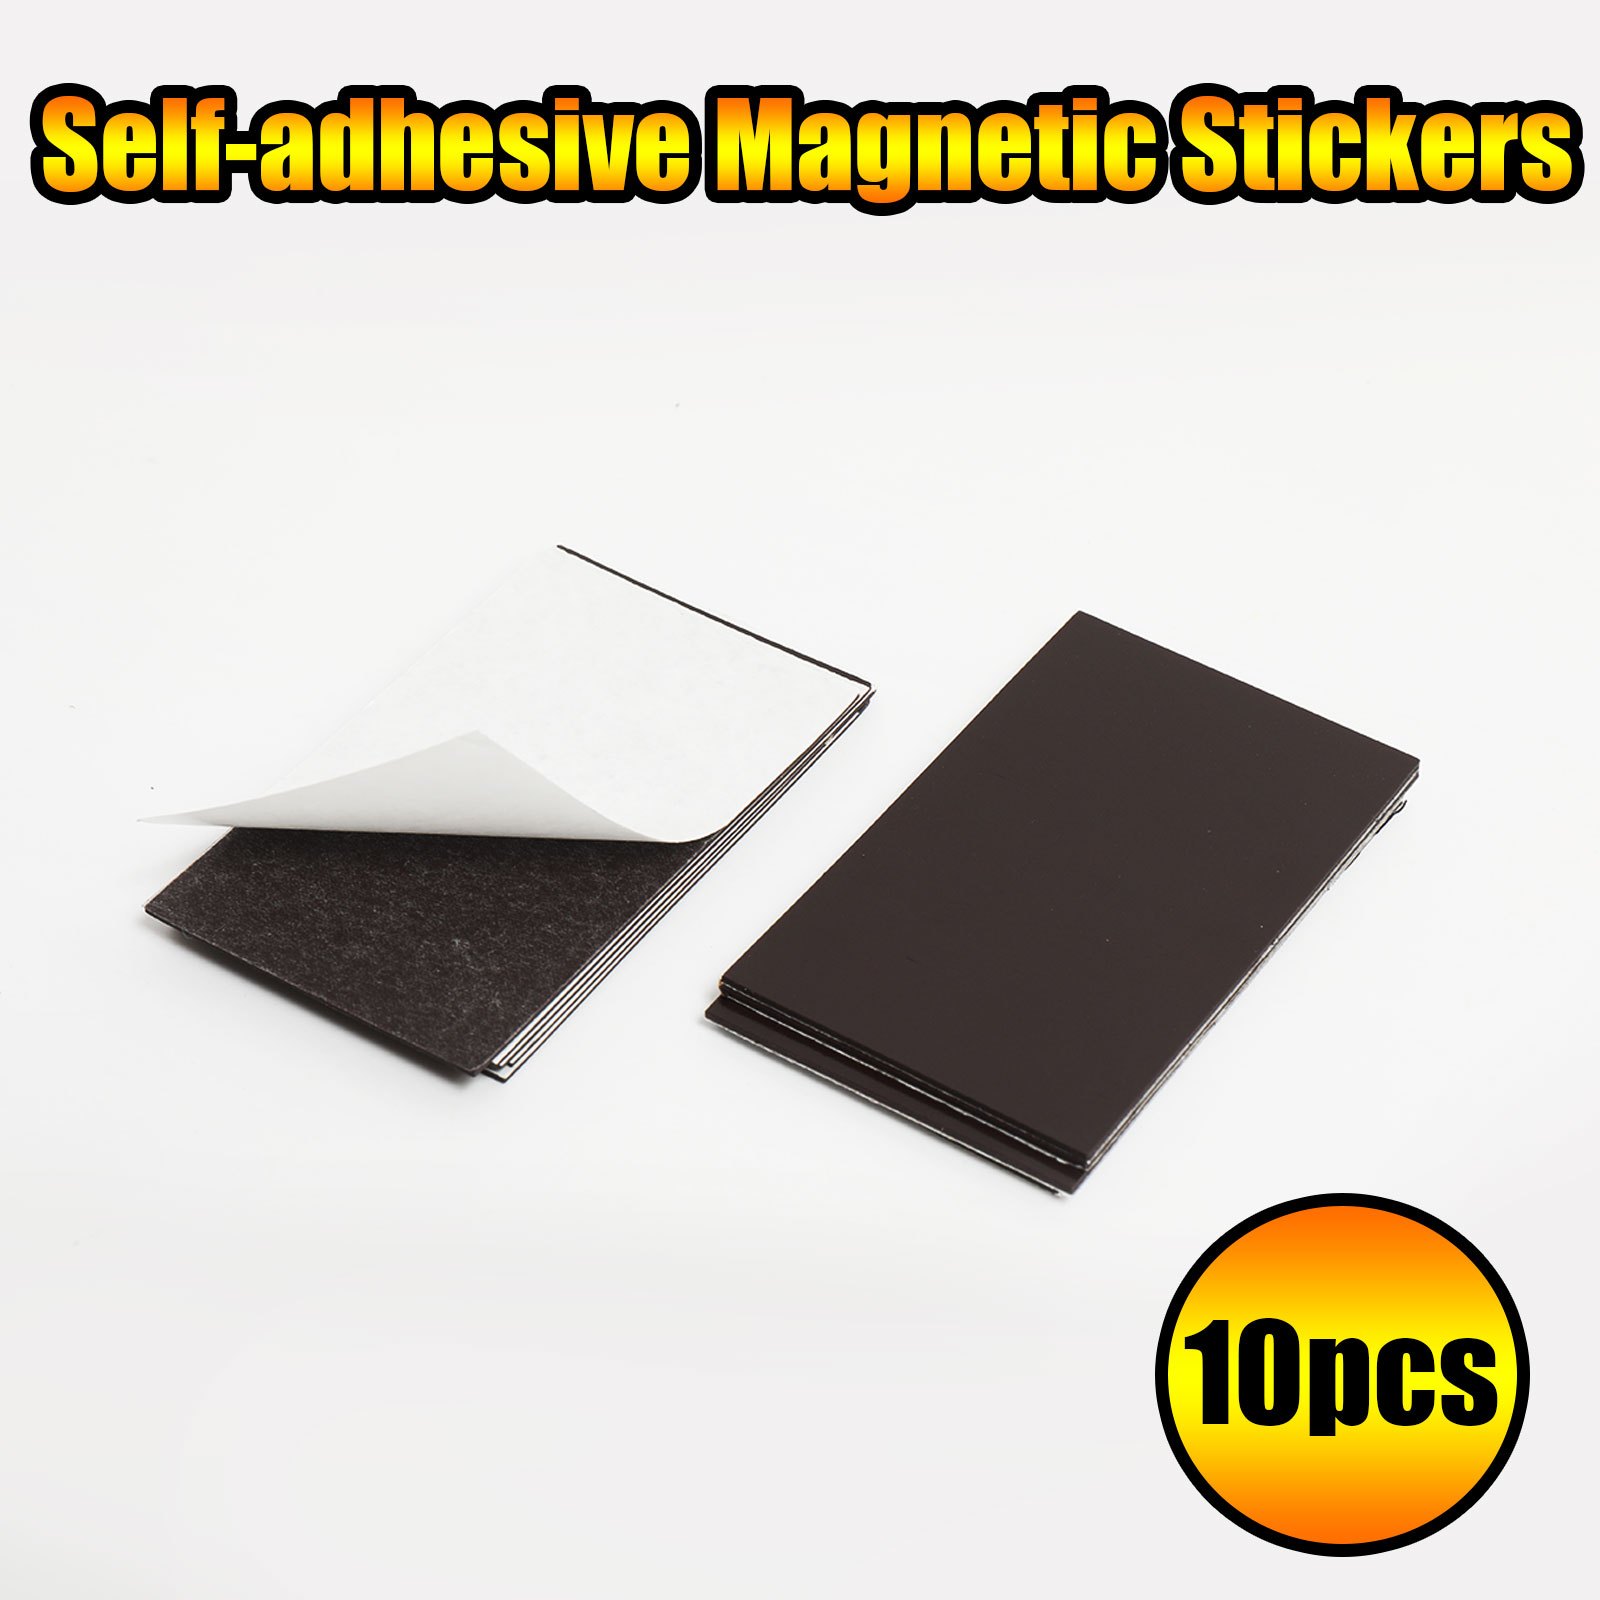 Magnetic Squares - 110 Self Adhesive Magnetic Squares (Each 4/5 inch x 4/5 inch) - Flexible Sticky Magnets - Peel & Stick Magnetic Sheets - Tape Is